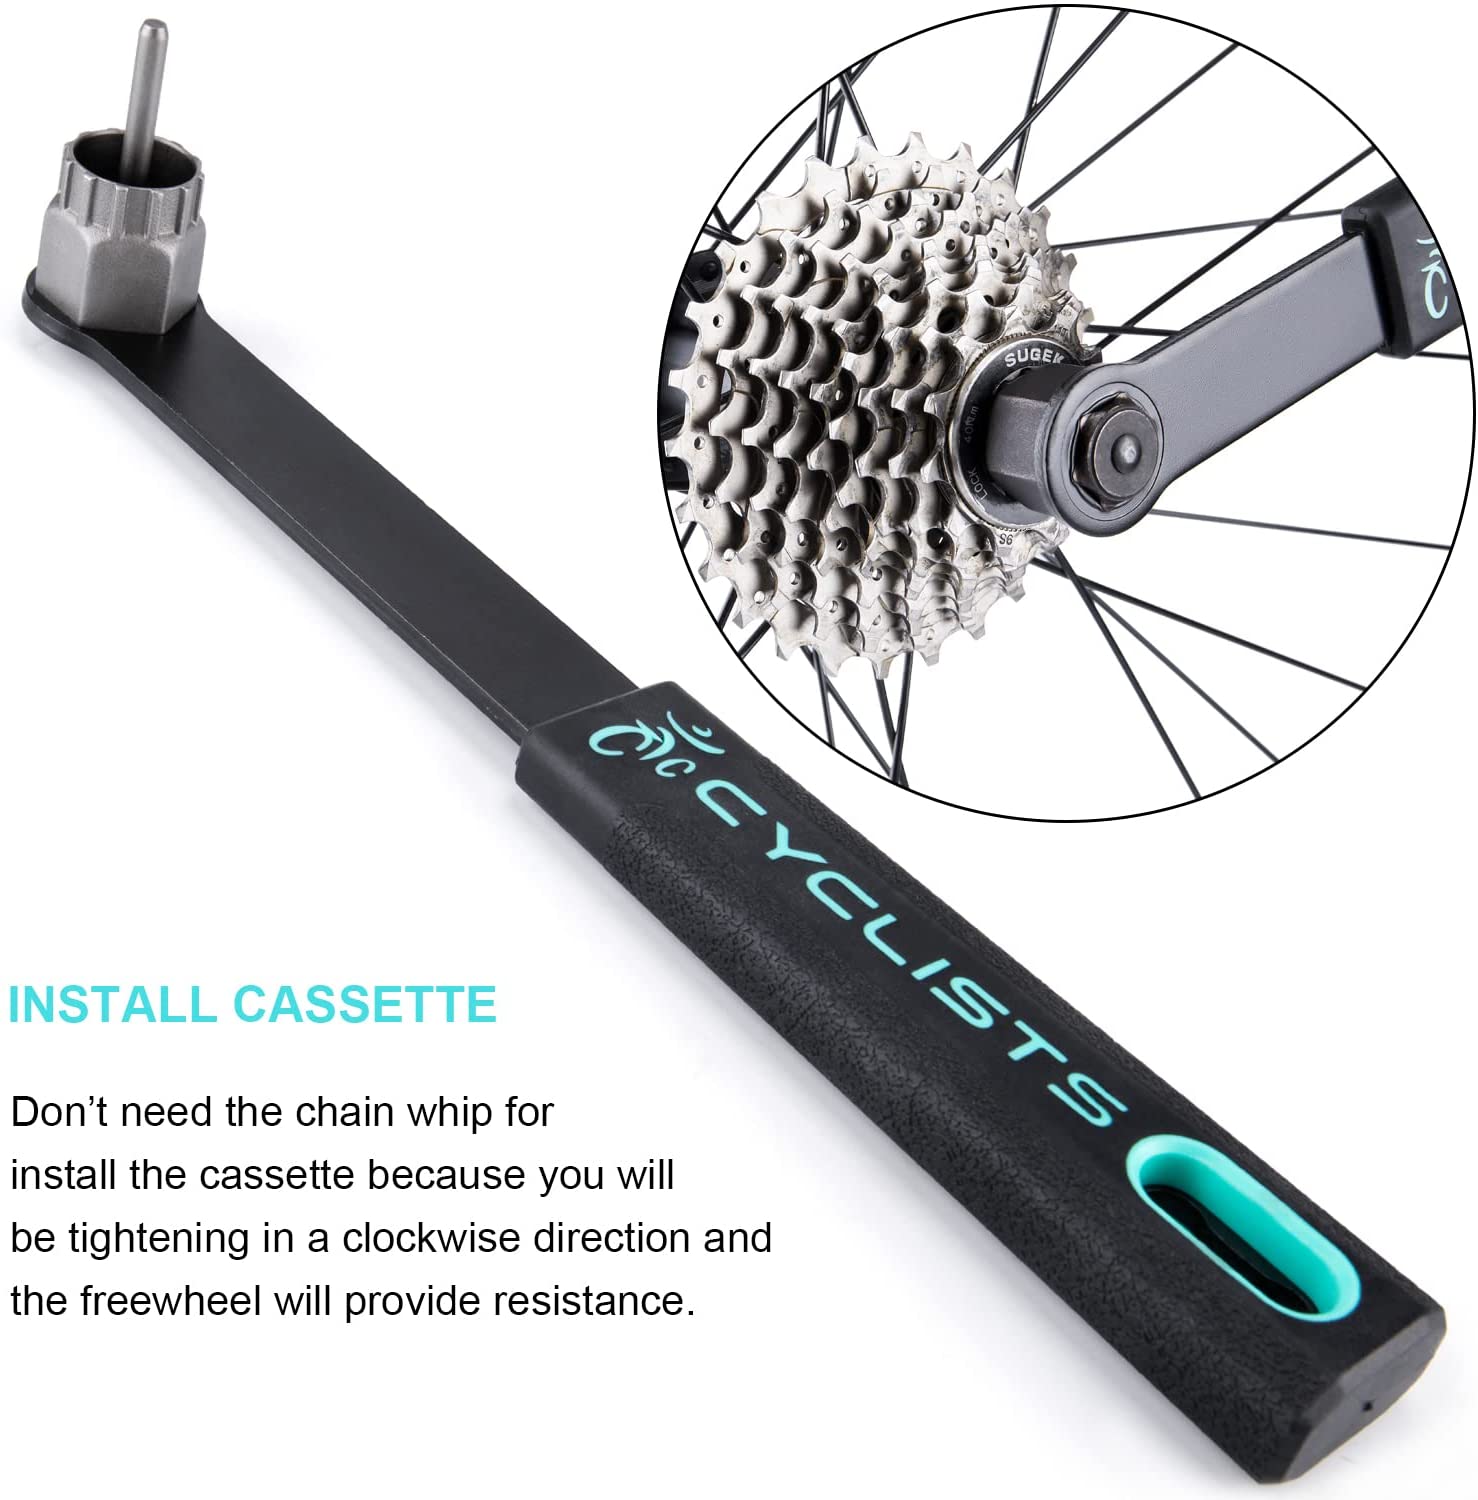 cyclists Cassette Removal Tool Sets - Chain Whip & Lock Ring Tool for Shimano HG Cassette/Freewheel Install Removal MTB Road Bike 7 8 9 10 1